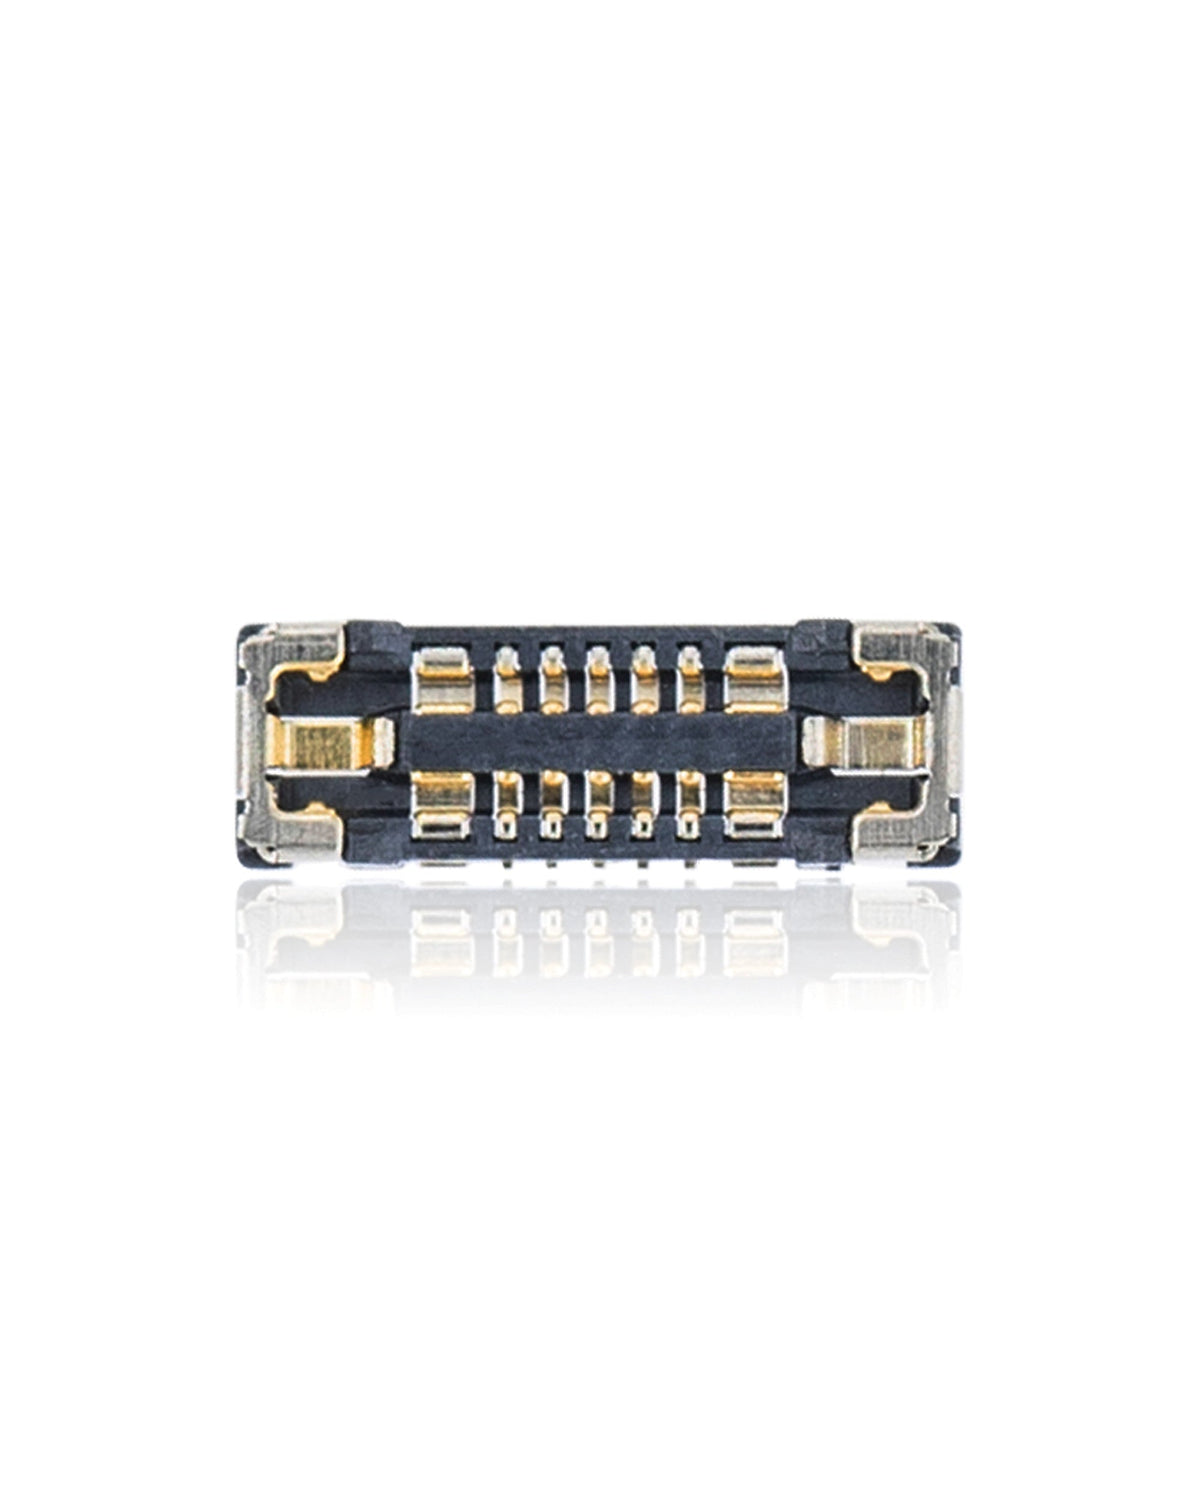 LATTICE PROJECTOR FACE ID FPC CONNECTOR COMPATIBLE WITH IPHONE 11 (10 PINS)